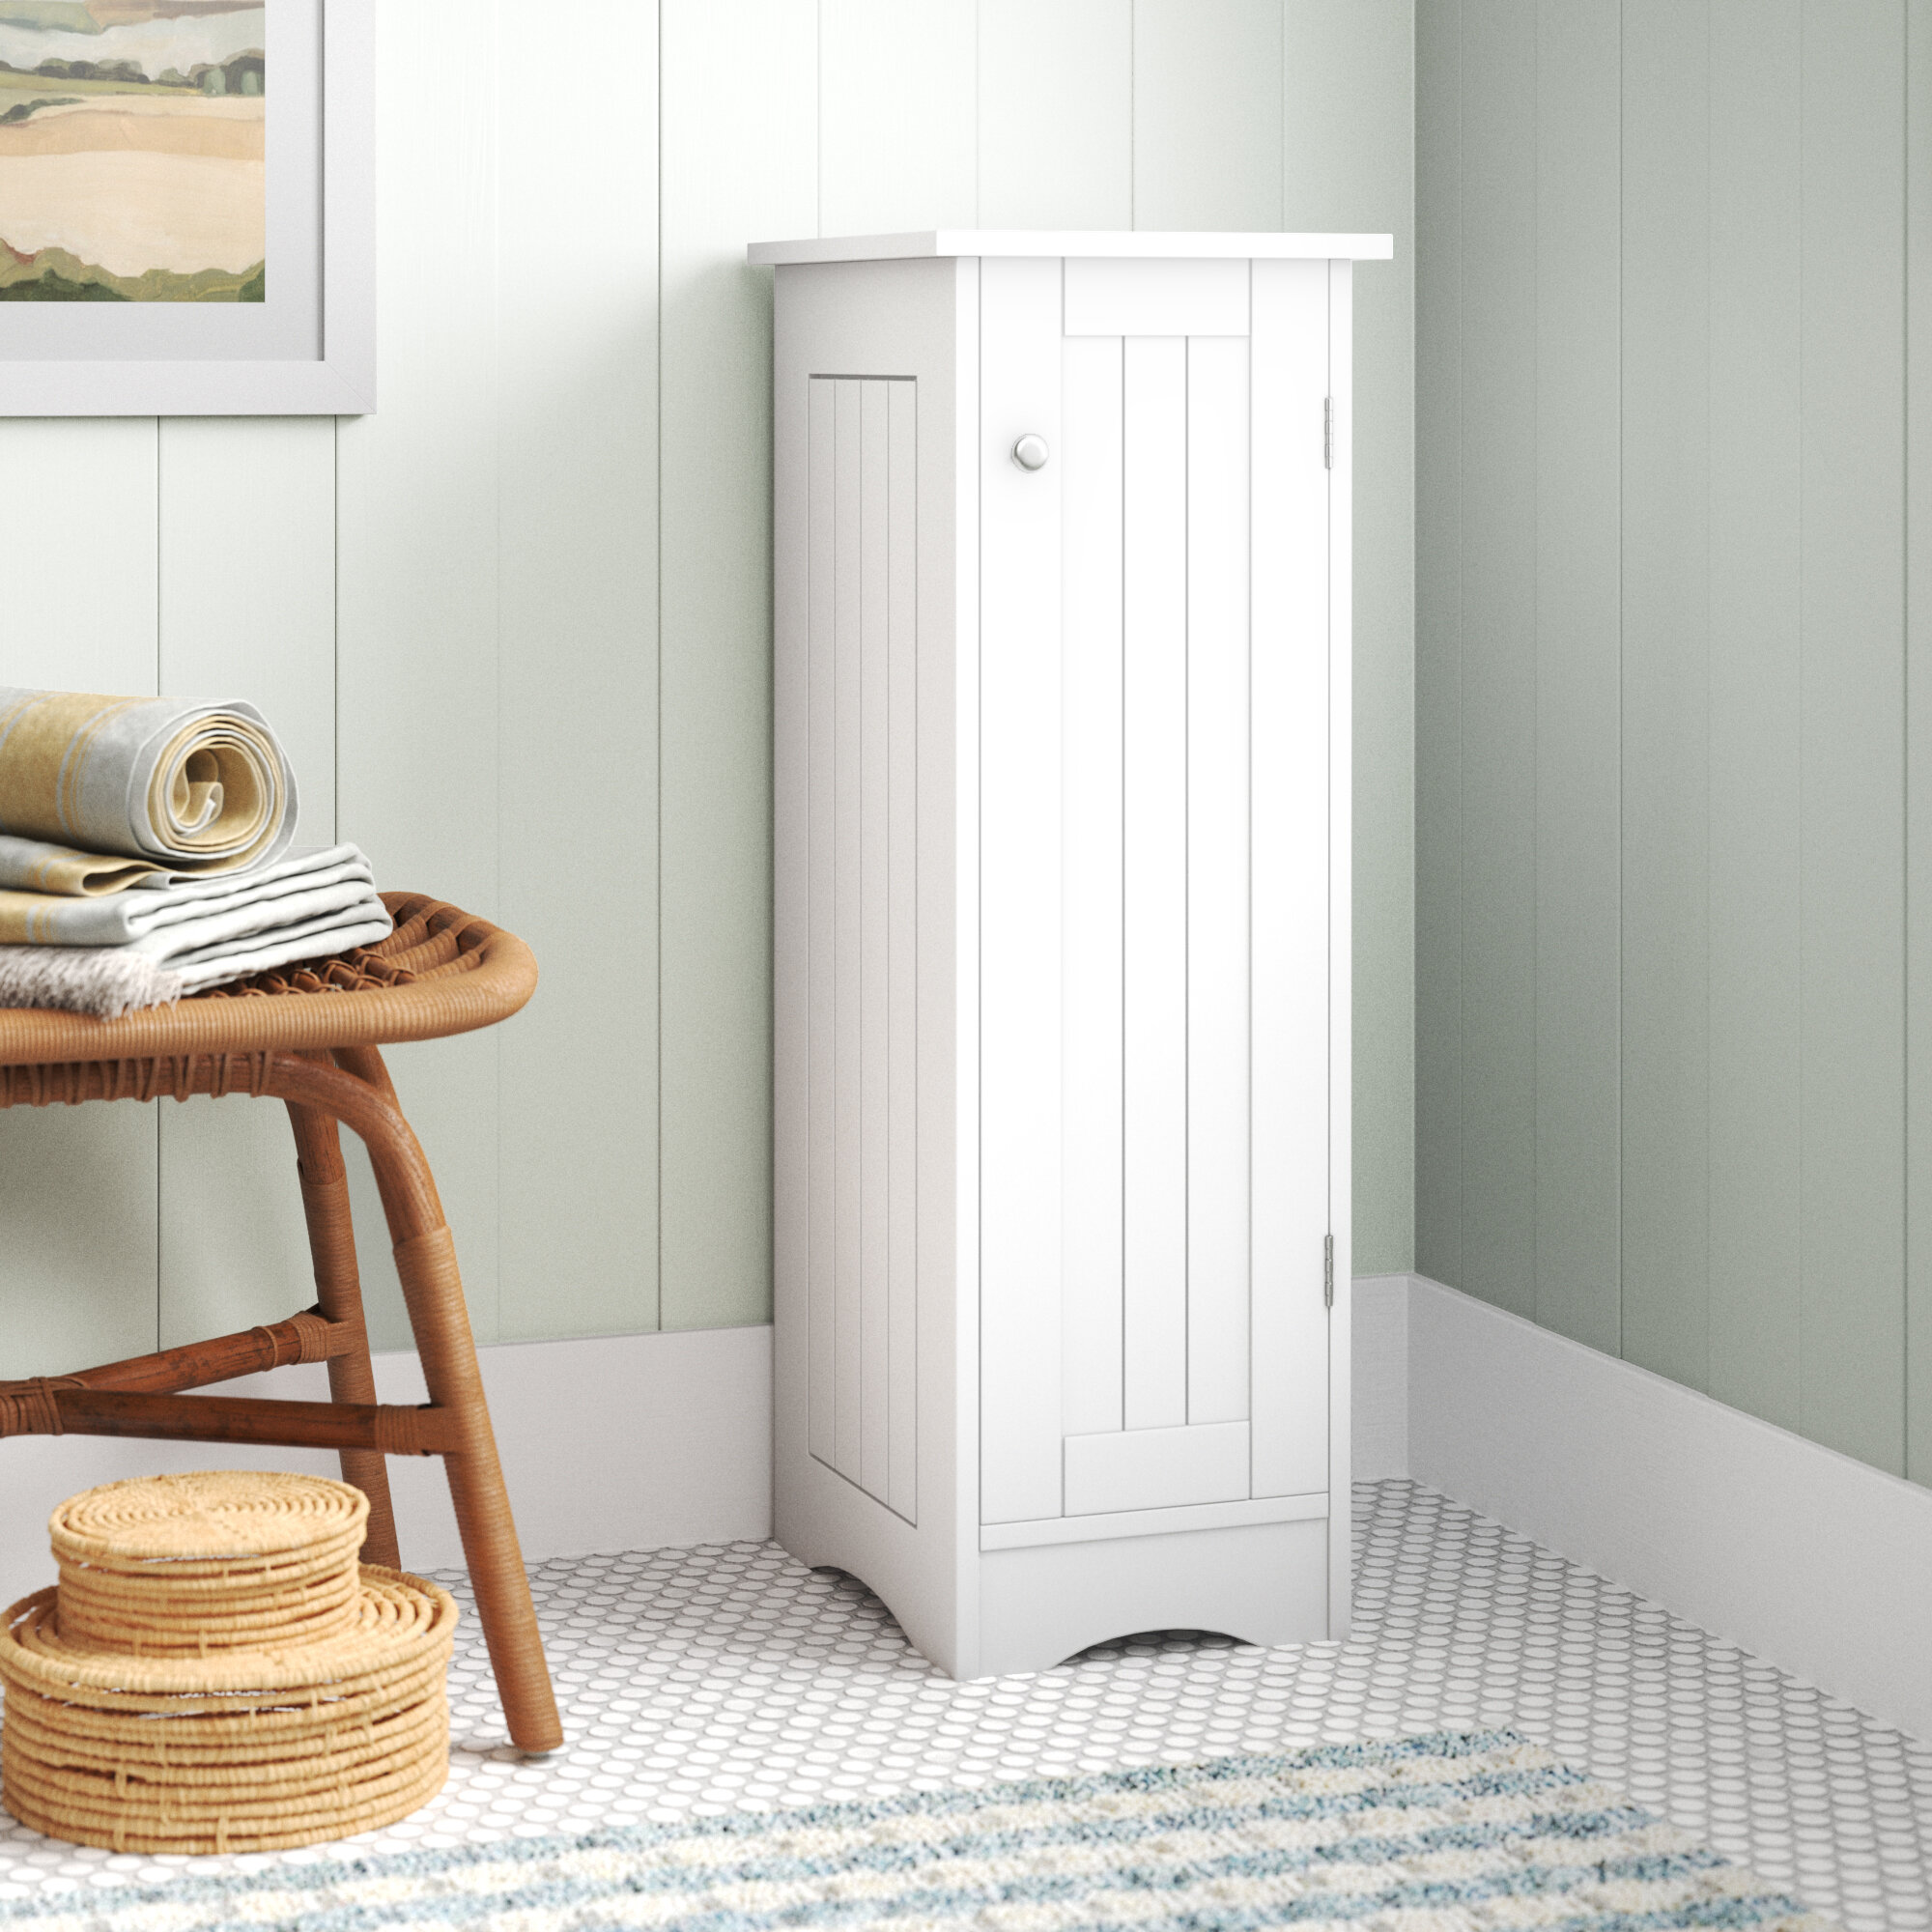 Sand & Stable Aydin Freestanding Bathroom Cabinet & Reviews